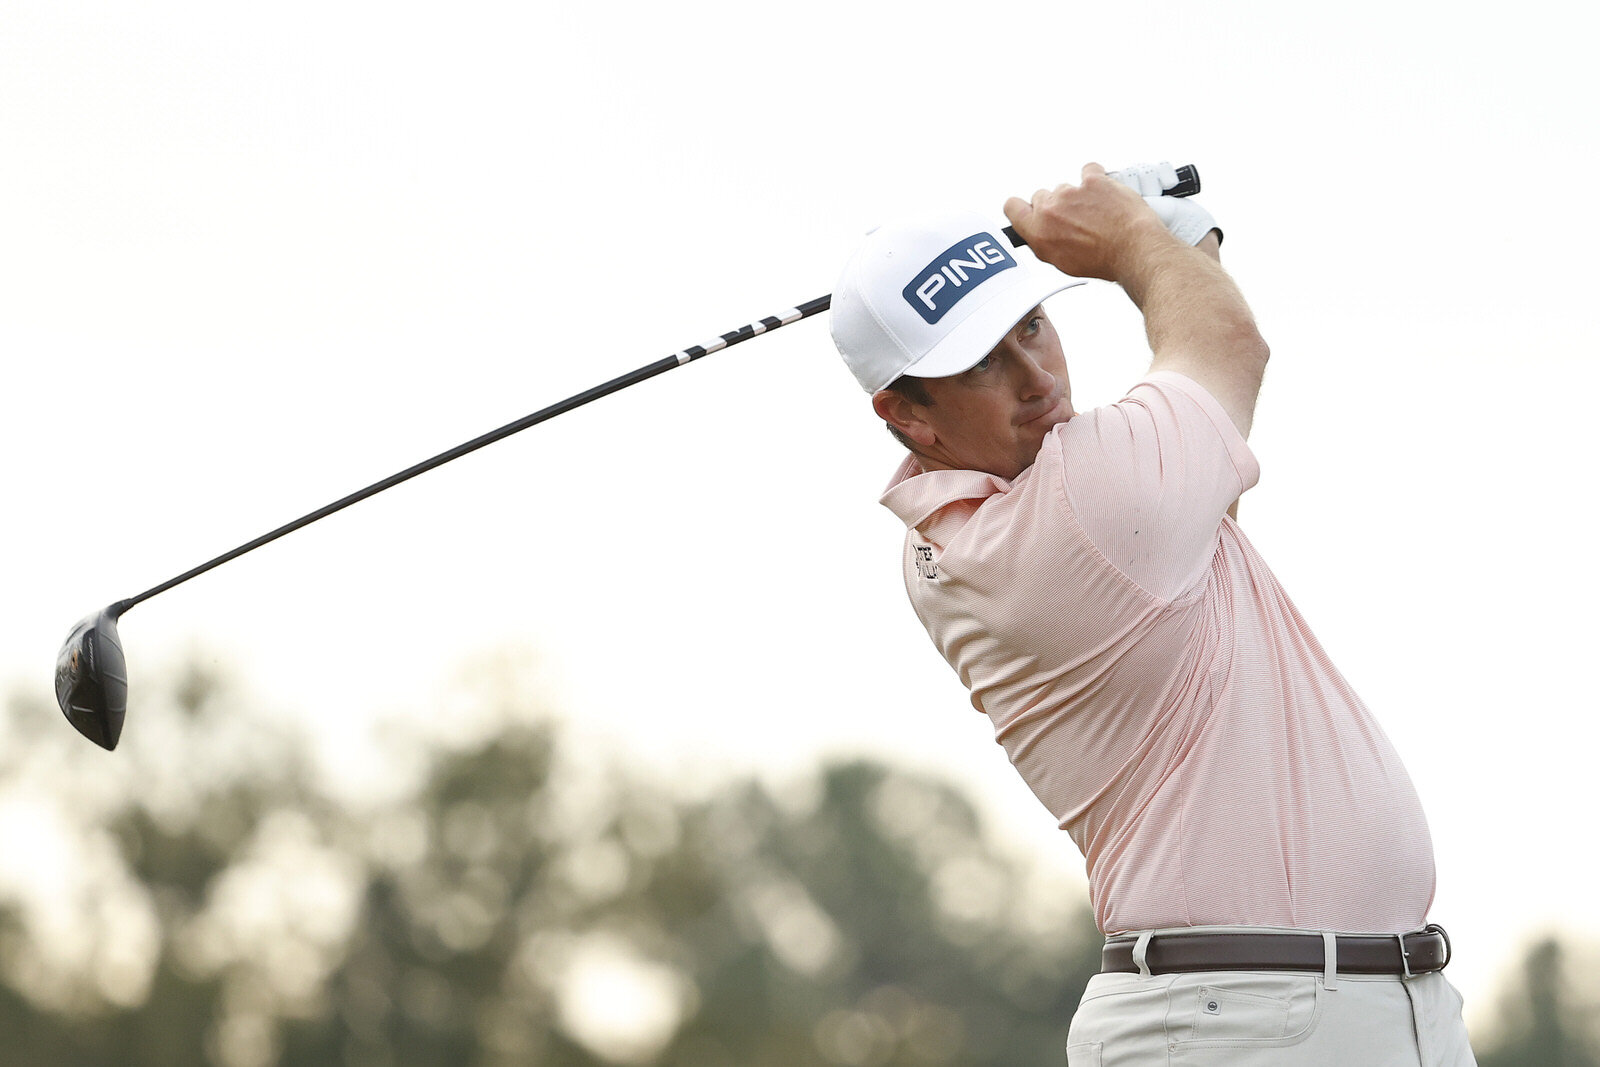  HOUSTON, TEXAS - NOVEMBER 05:  Michael Thompson of the United States plays his shot from the tenth tee during the first round of the Vivint Houston Open at Memorial Park Golf Course on November 05, 2020 in Houston, Texas. (Photo by Maddie Meyer/Gett